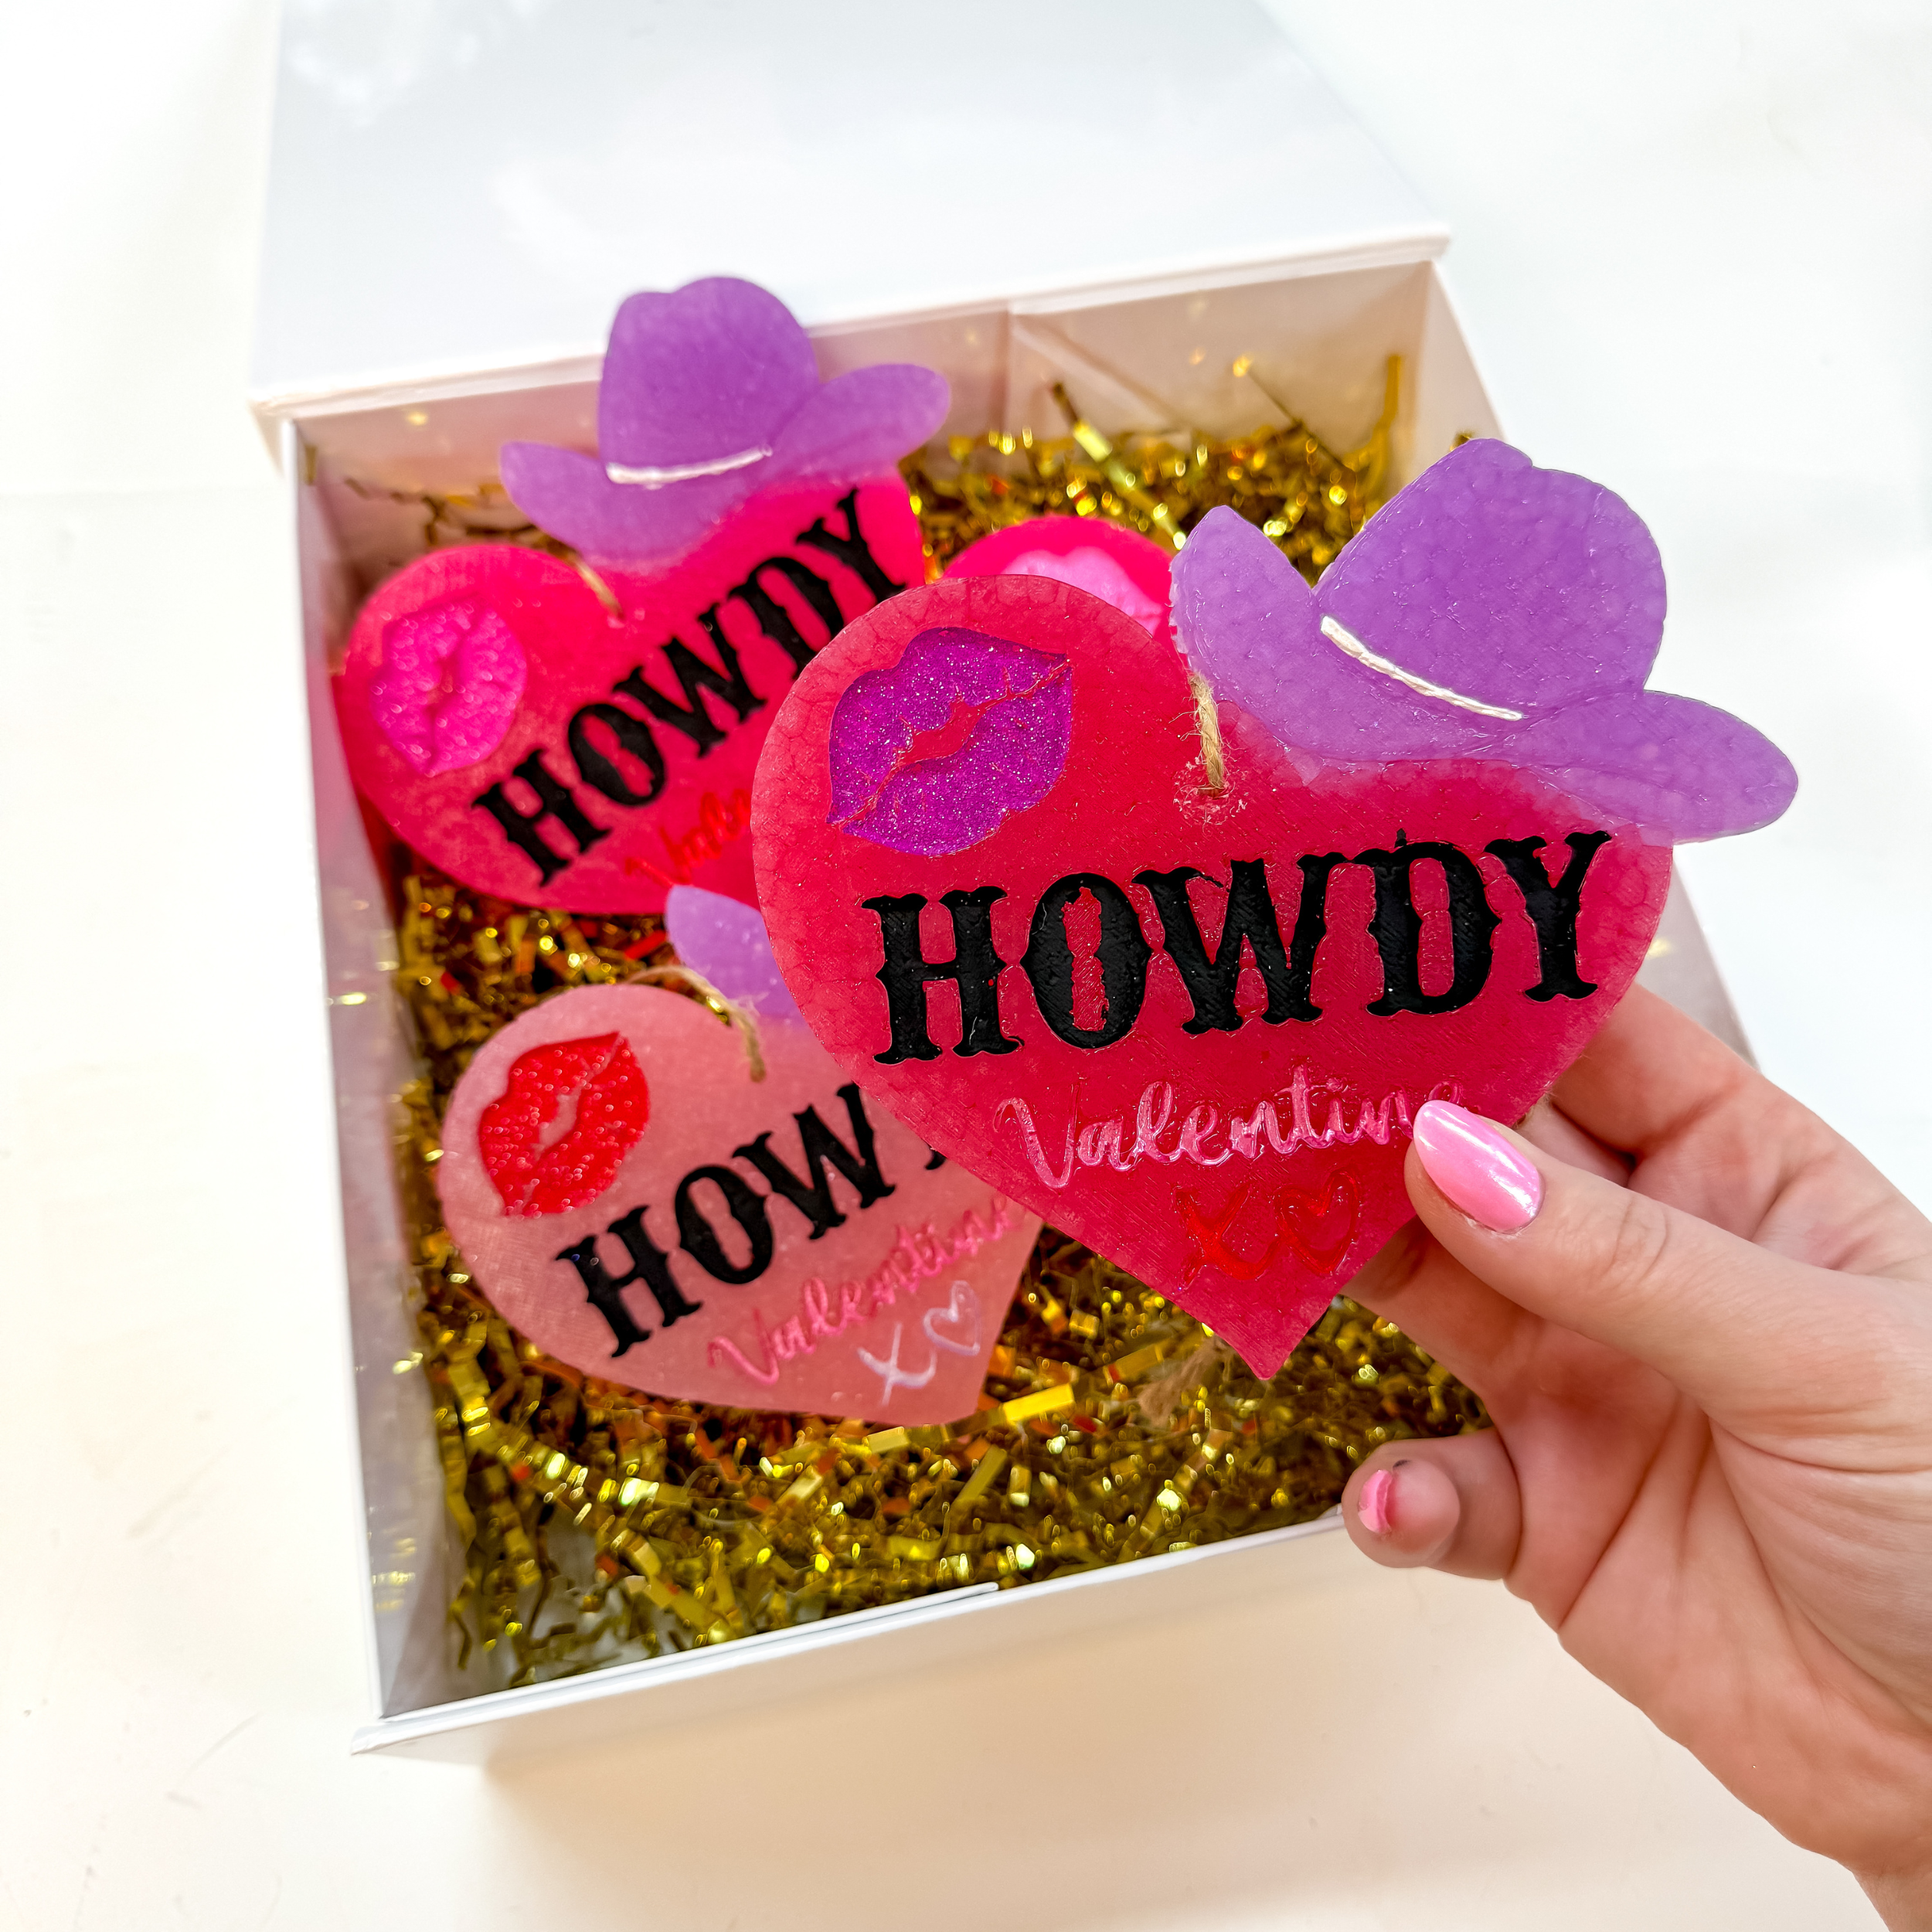 Howdy Valentine Car Freshie in Love Spell Scent - Giddy Up Glamour Boutique